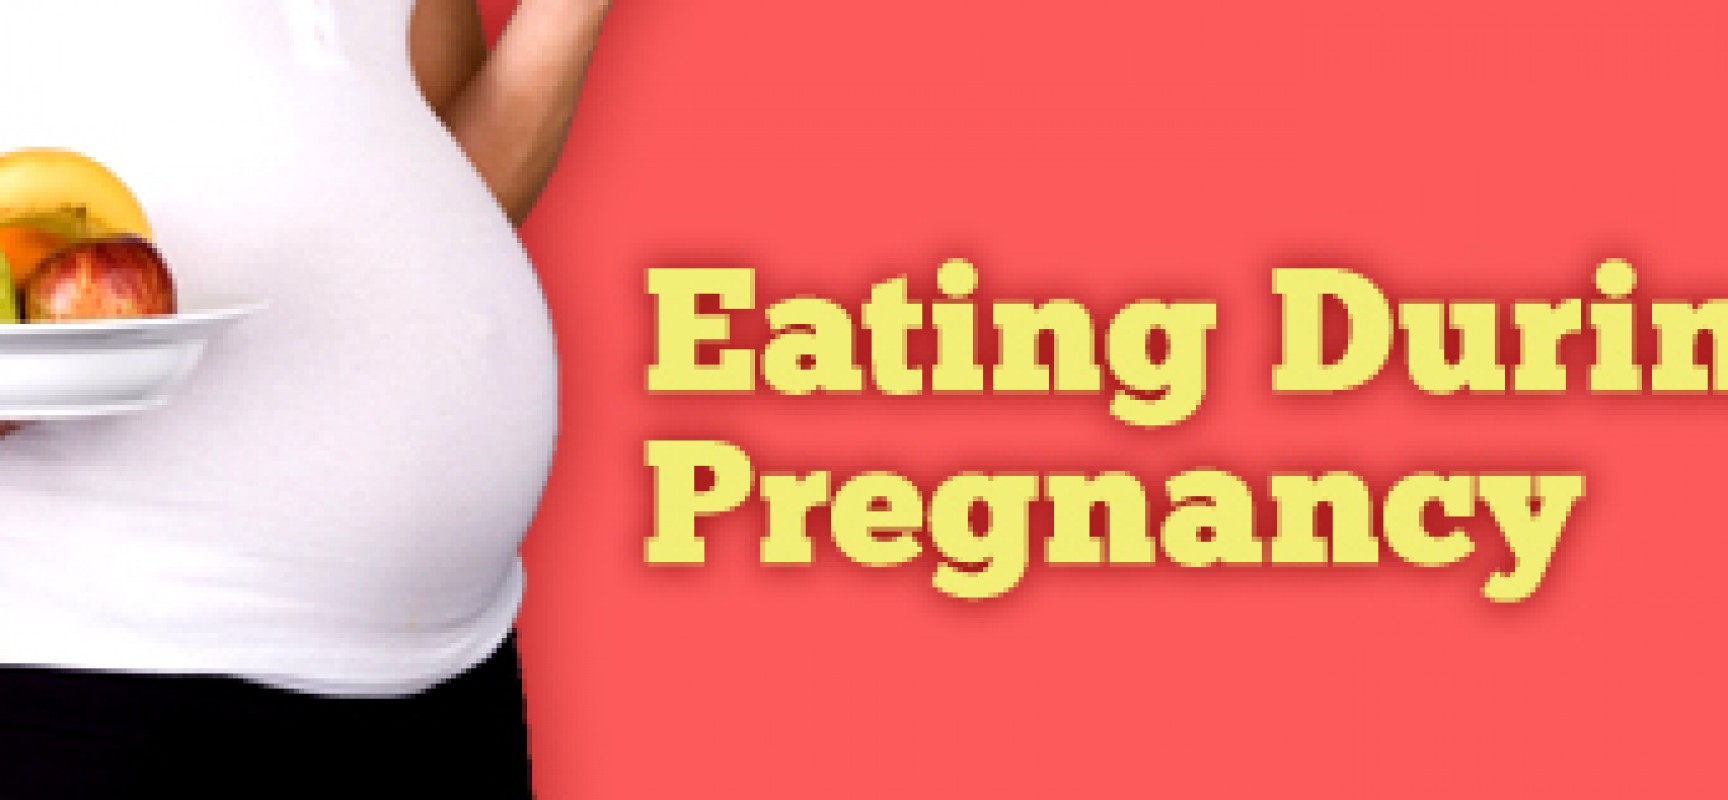 Diet for healthy pregnancy